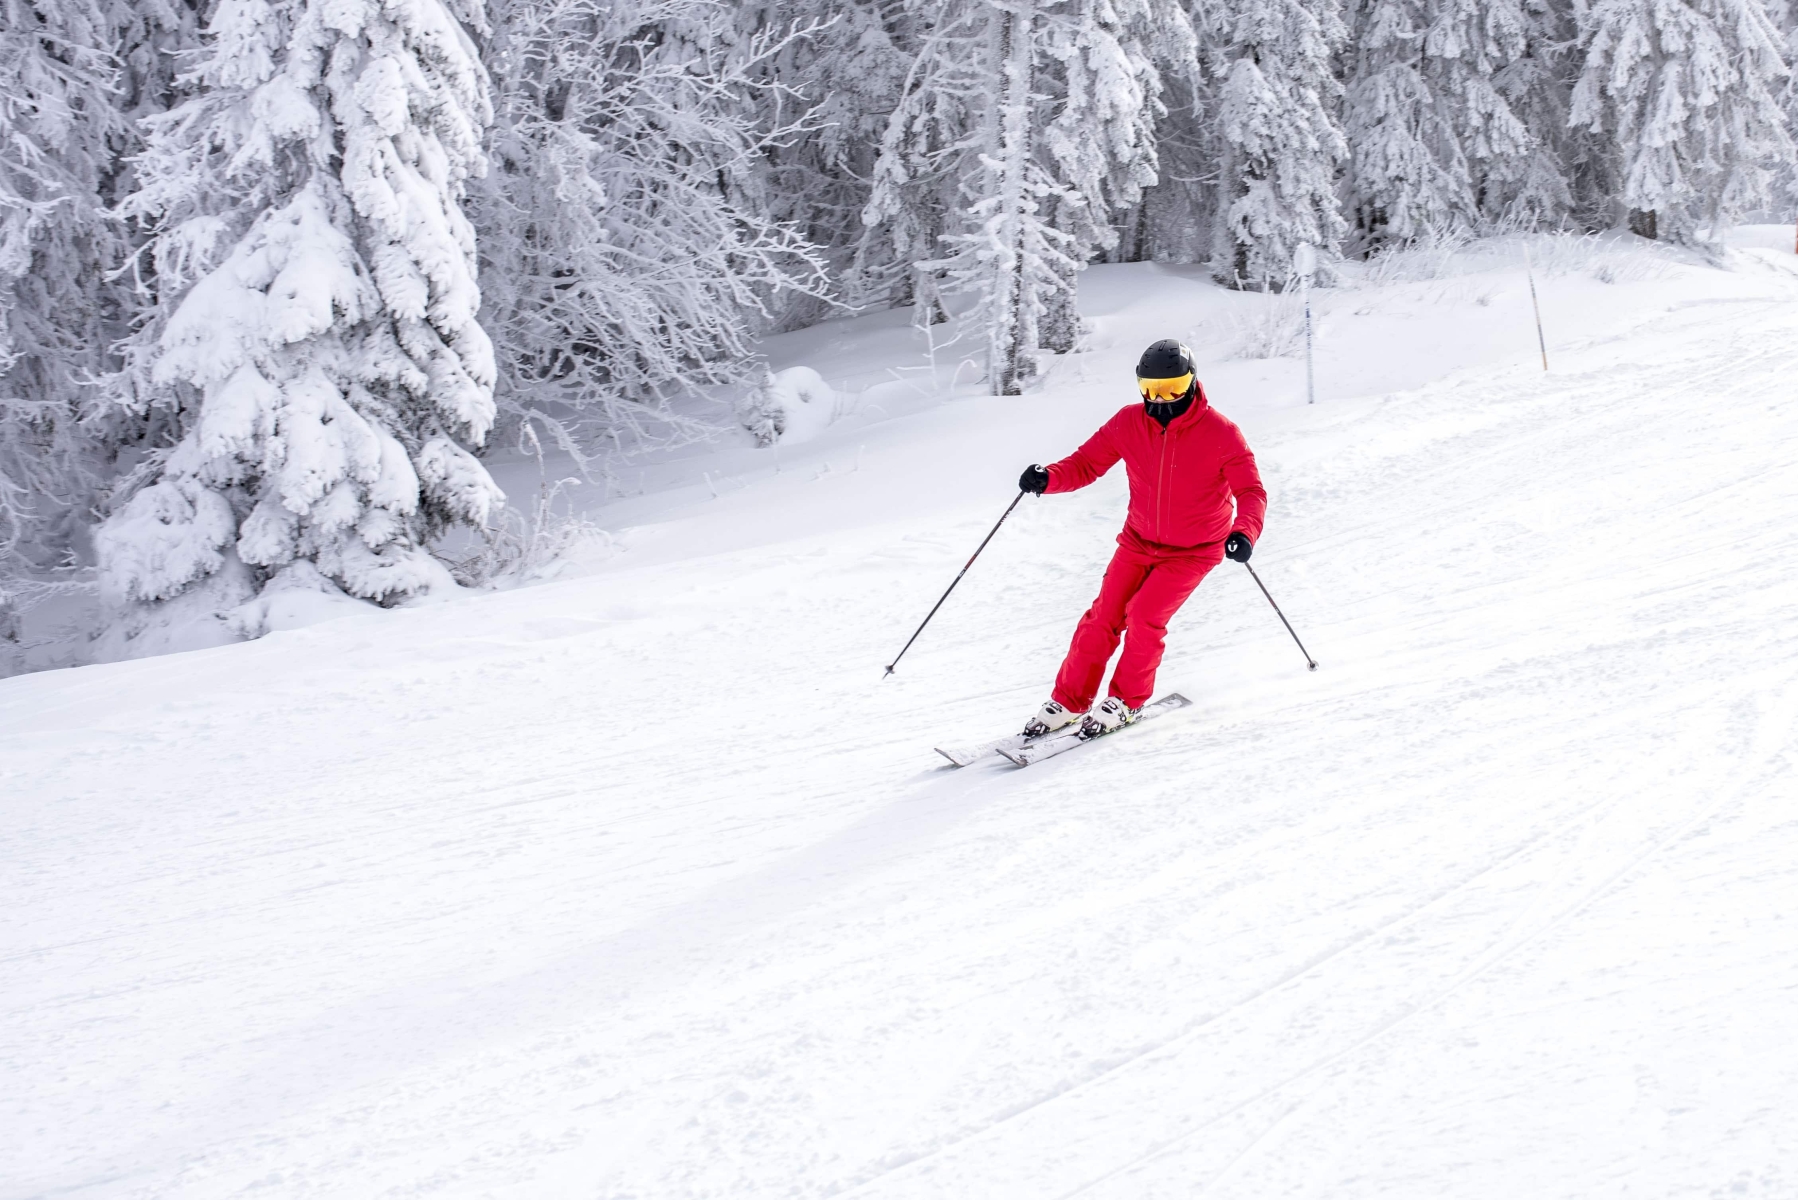 skier-ina-red-costume-skiing-down-the-slope-near-the-trees